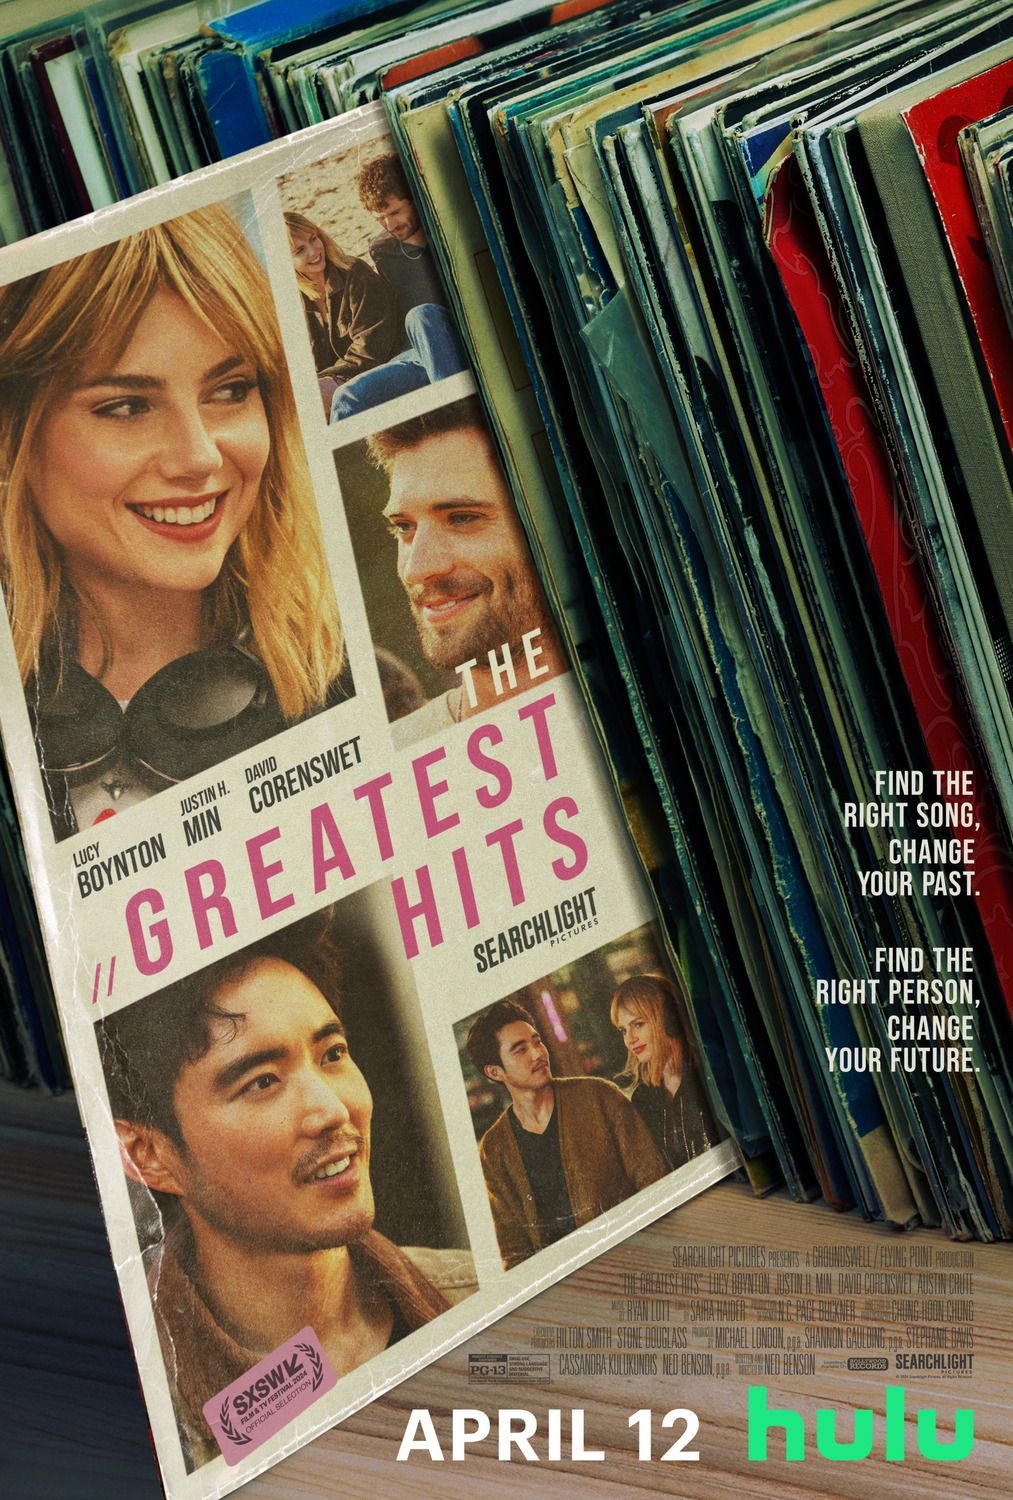 The Greatest Hits Puts A Vinyl Spin On The Meet-Cute In New Clip [EXCLUSIVE]